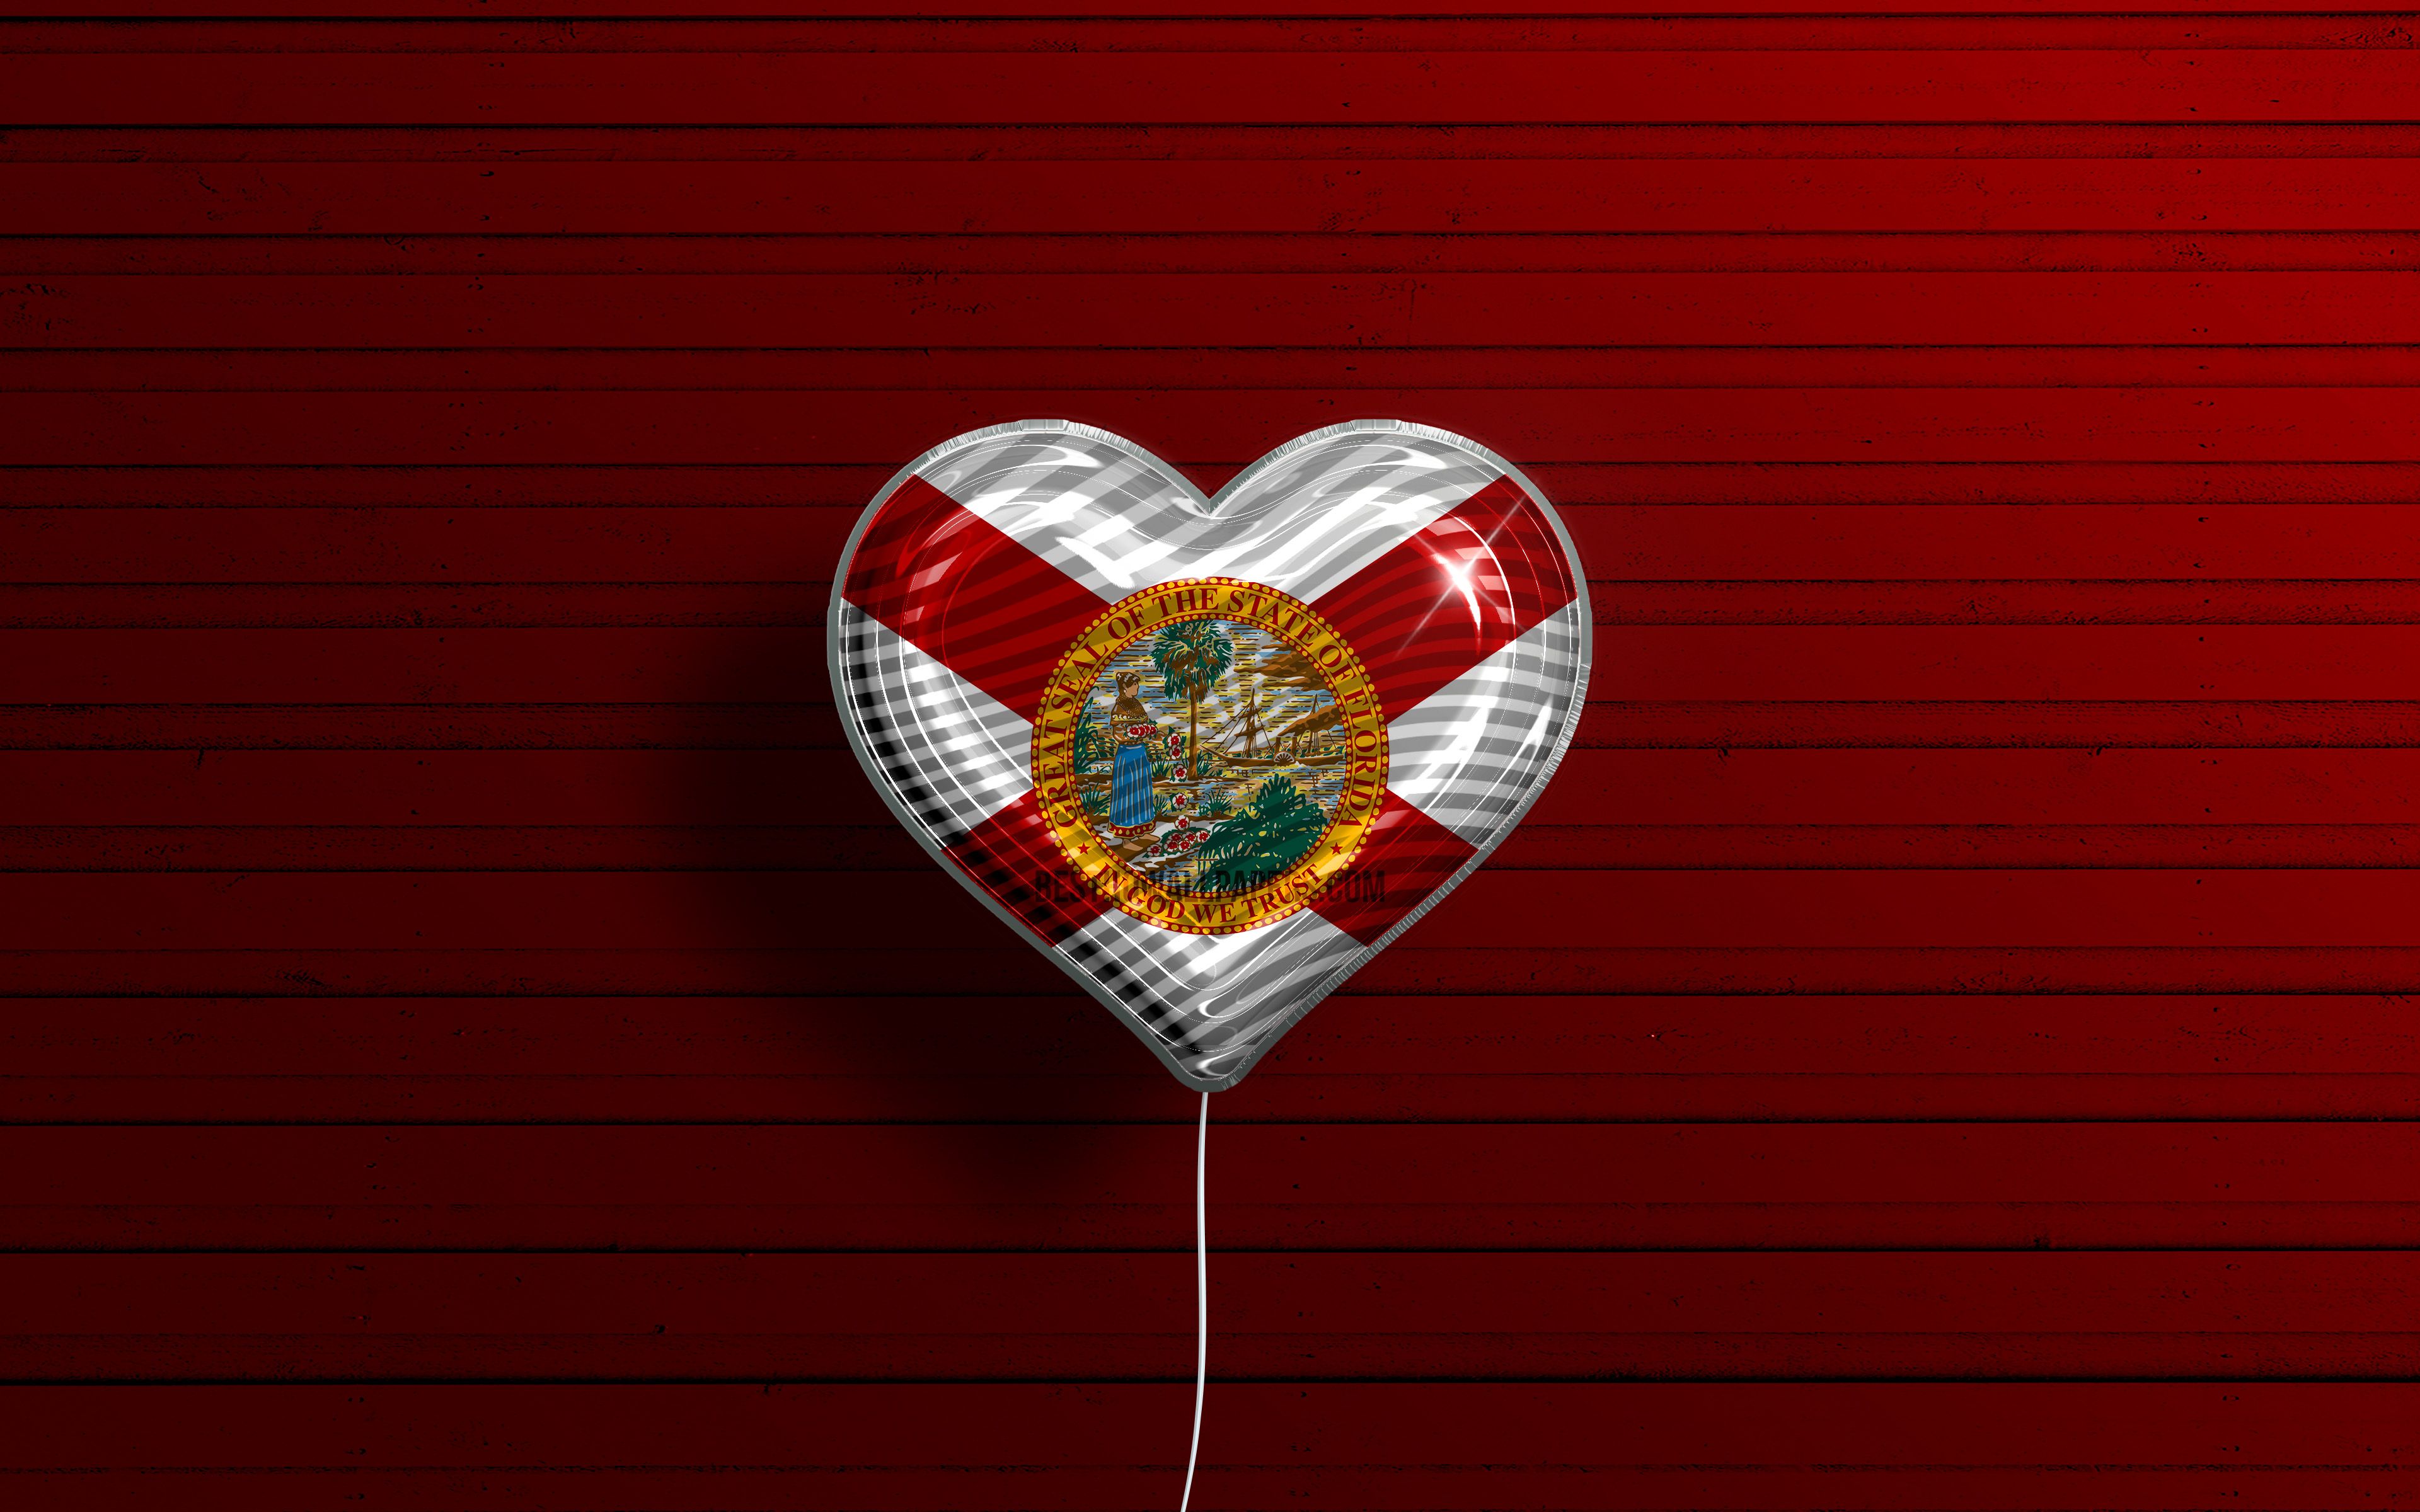 Download wallpaper I Love Florida, 4k, realistic balloons, red wooden background, United States of America, Florida flag heart, flag of Florida, balloon with flag, American states, Love Florida, USA for desktop with